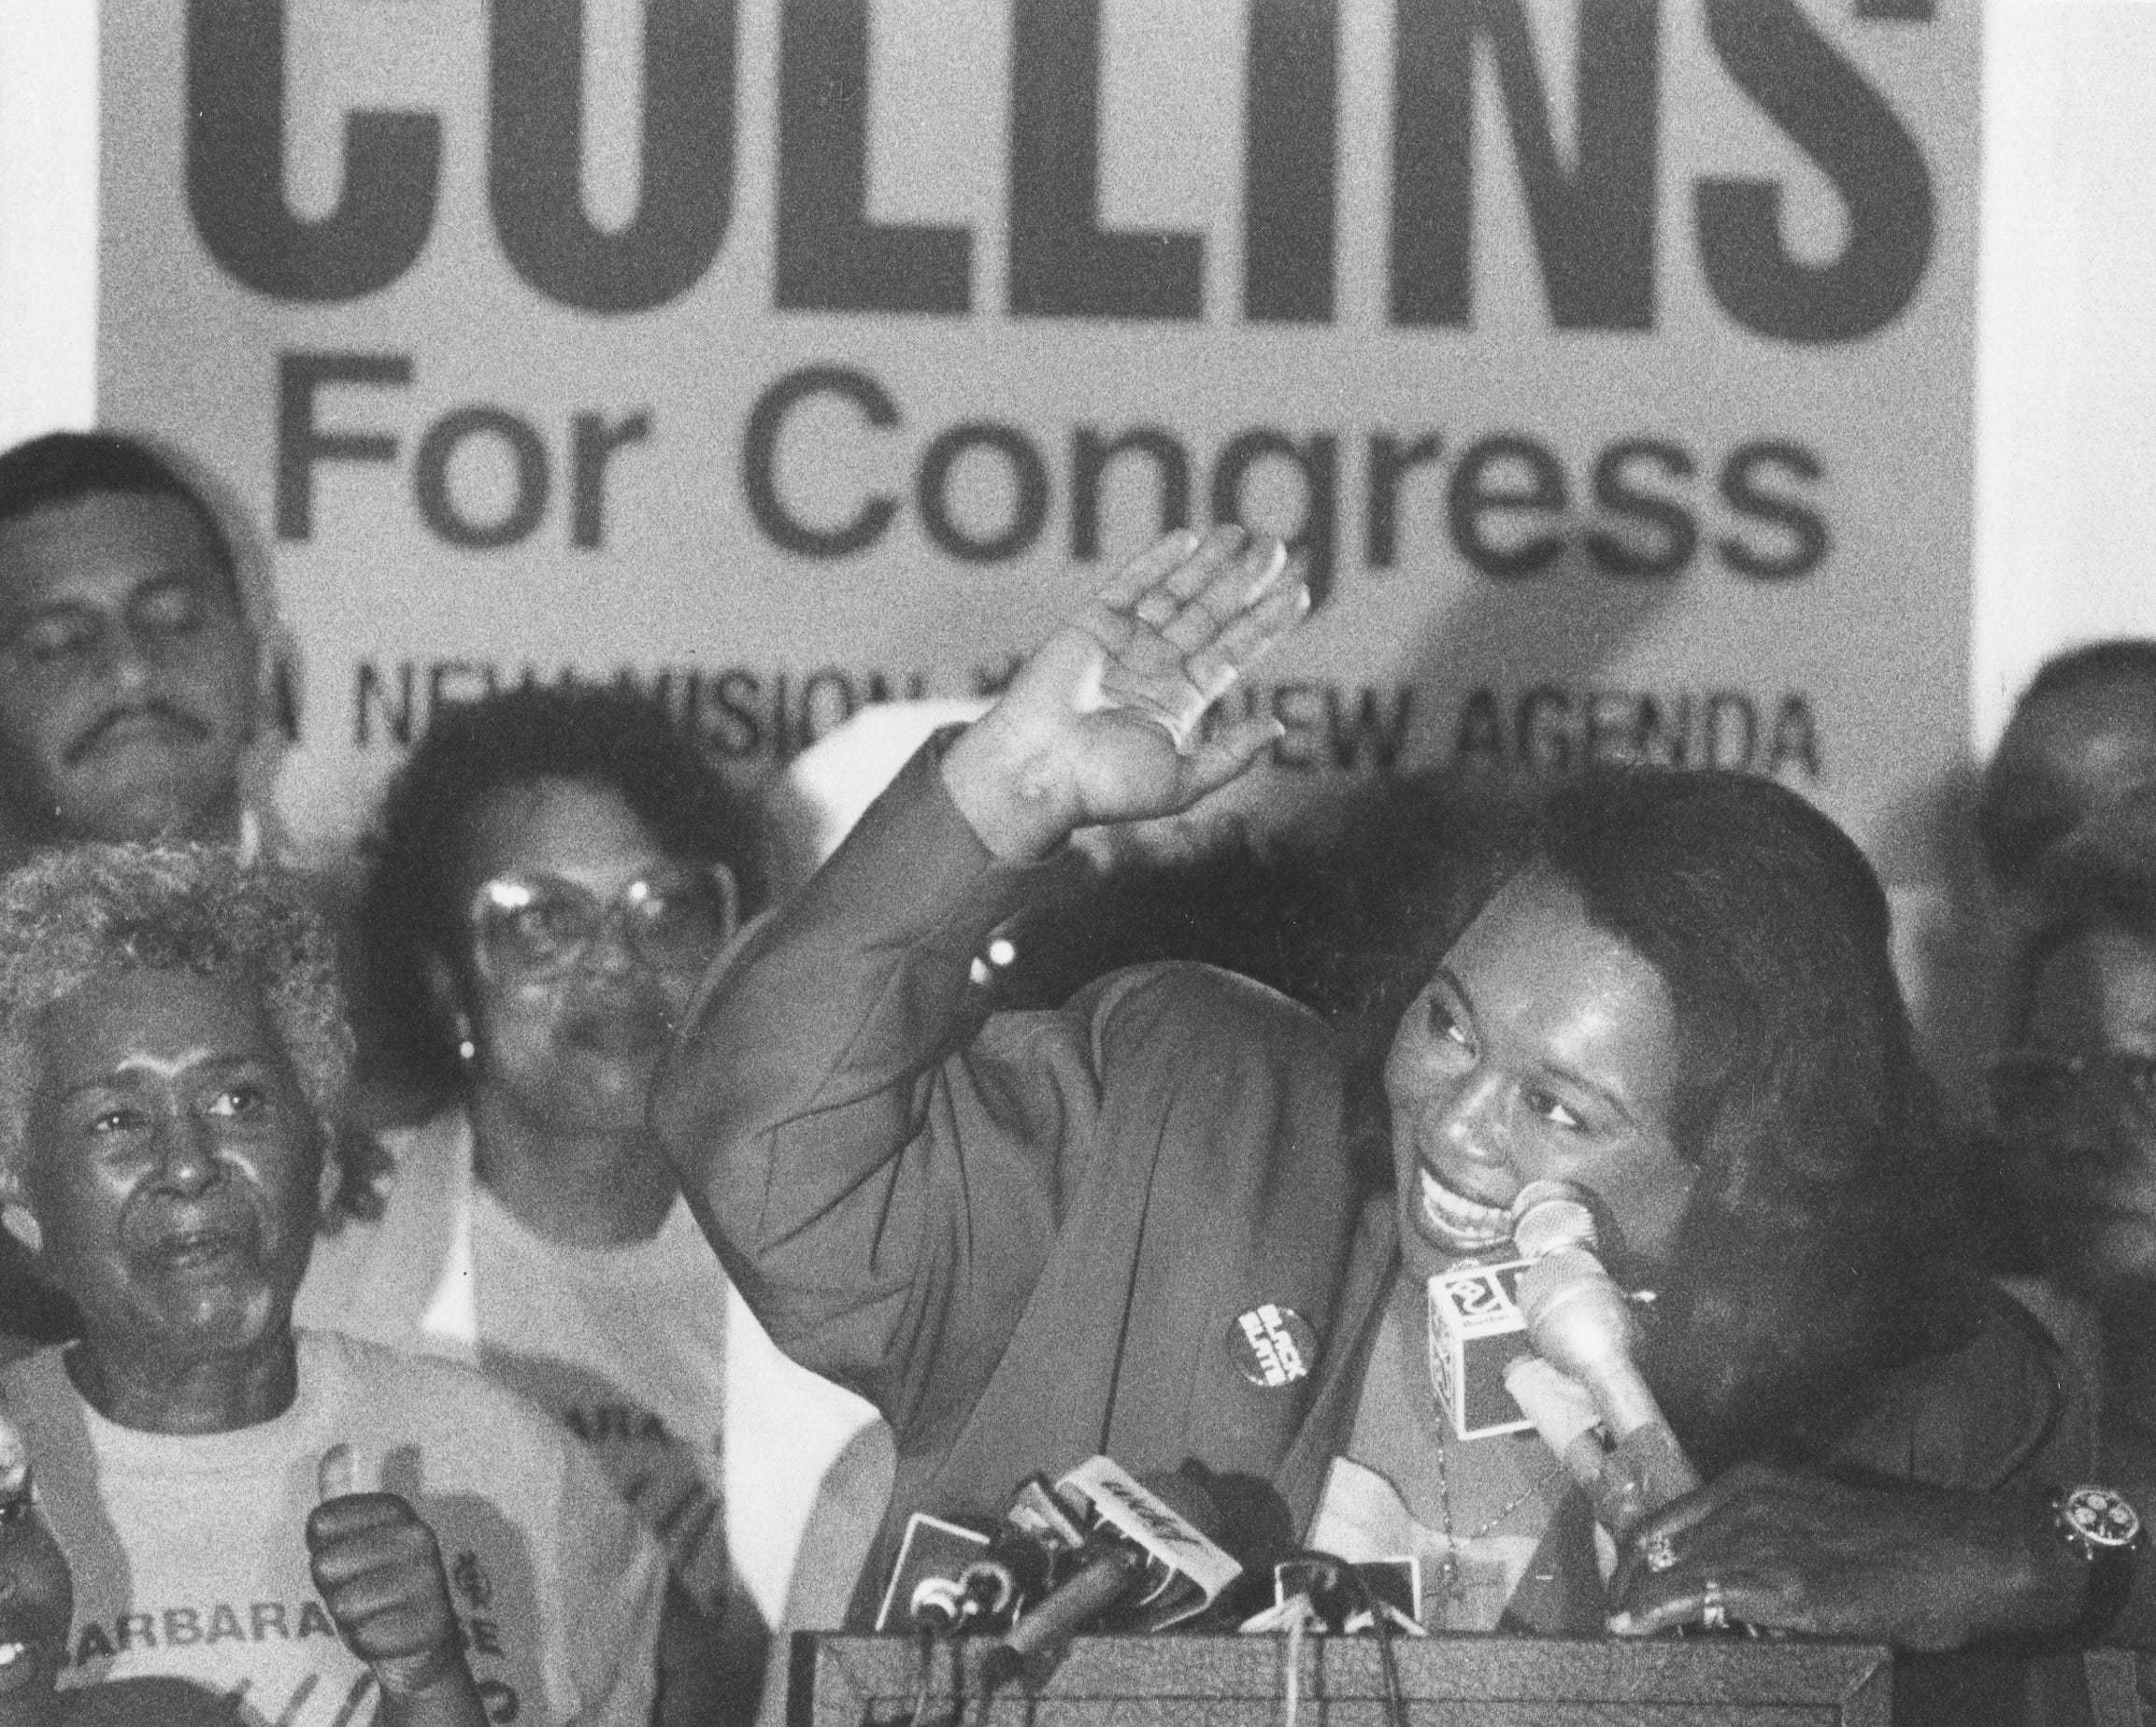 Longtime community activist and Detroit Congresswoman Barbara-Rose Collins, seen here campaigning for congress on Aug. 9, 1990, died at the age of 82, her family announced in a statement on Thursday, Nov. 4, 2021. Collins was elected to the U.S. House in 1990, becoming the first Black woman from Michigan elected to Congress.